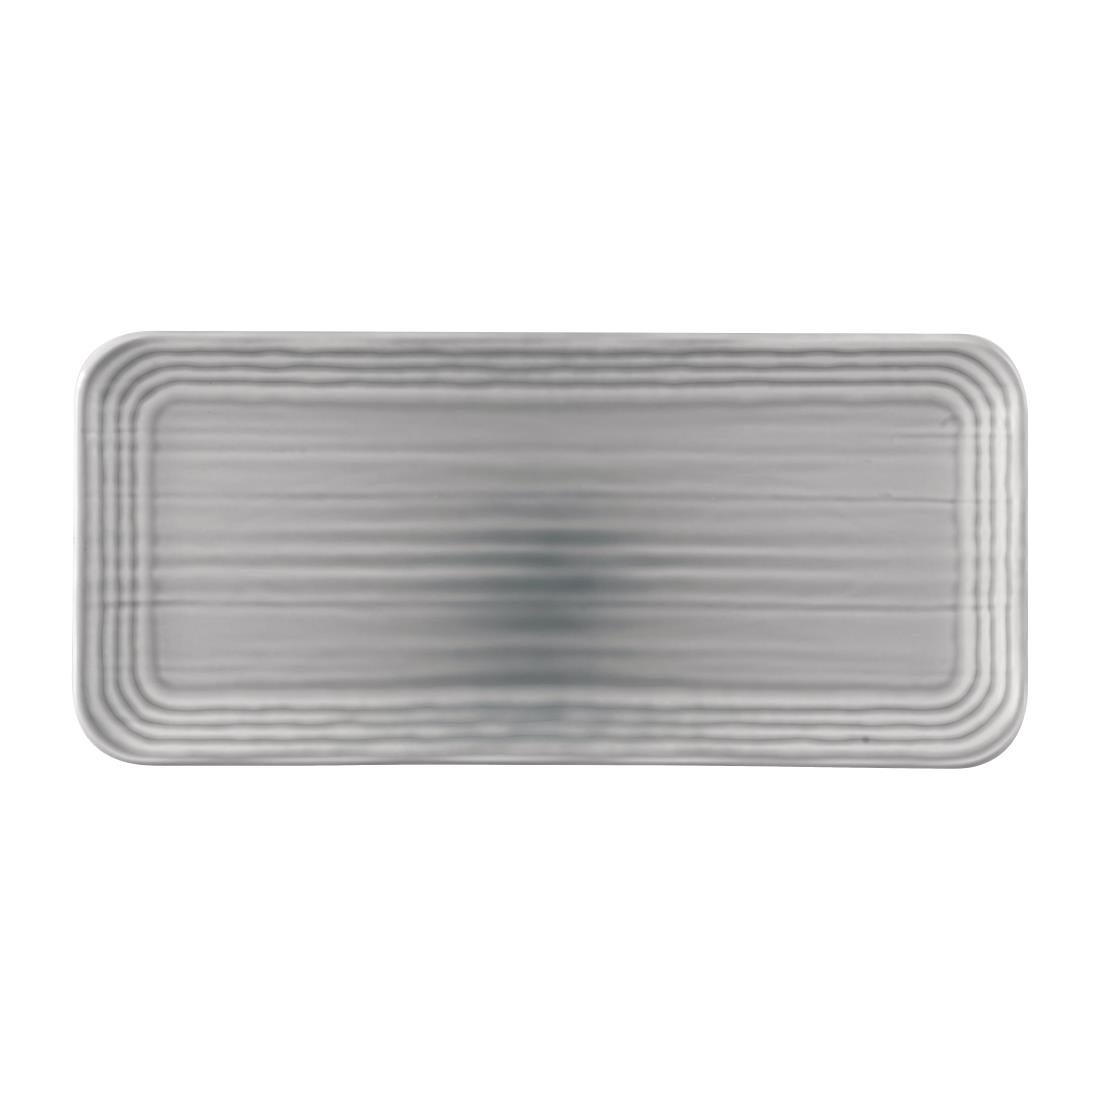 Dudson Harvest Norse Organic Coupe Rect Platter Grey 338x155mm (Pack of 6)